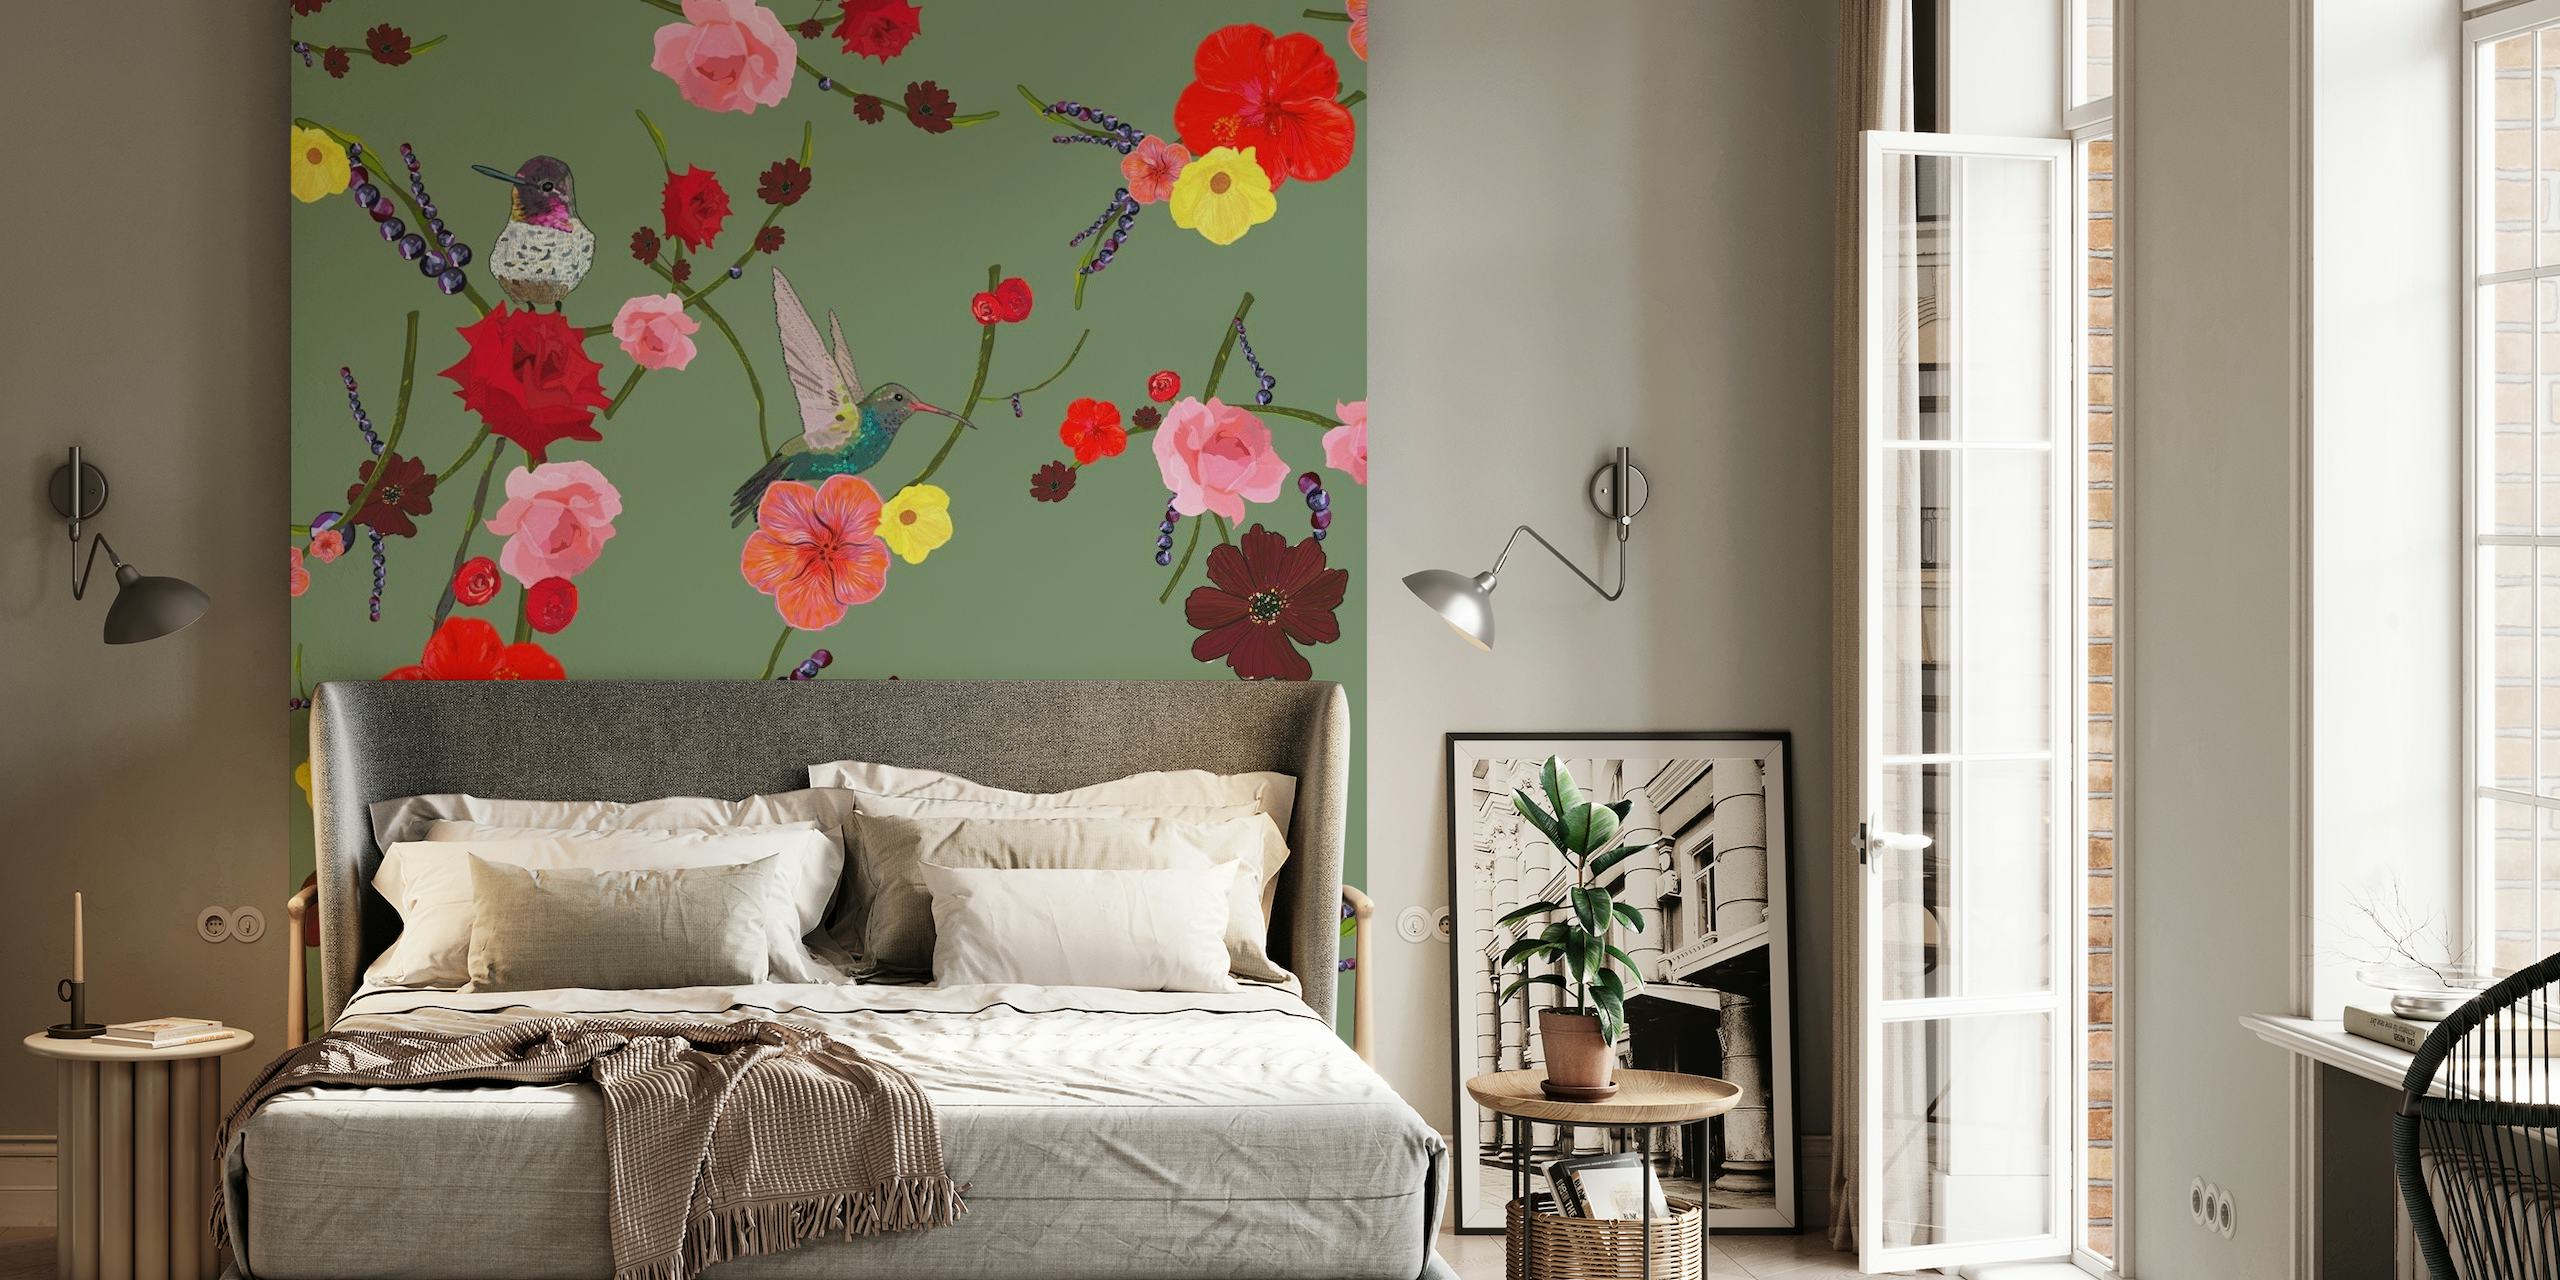 Floral wall mural with birds and hibiscus roses on a green background